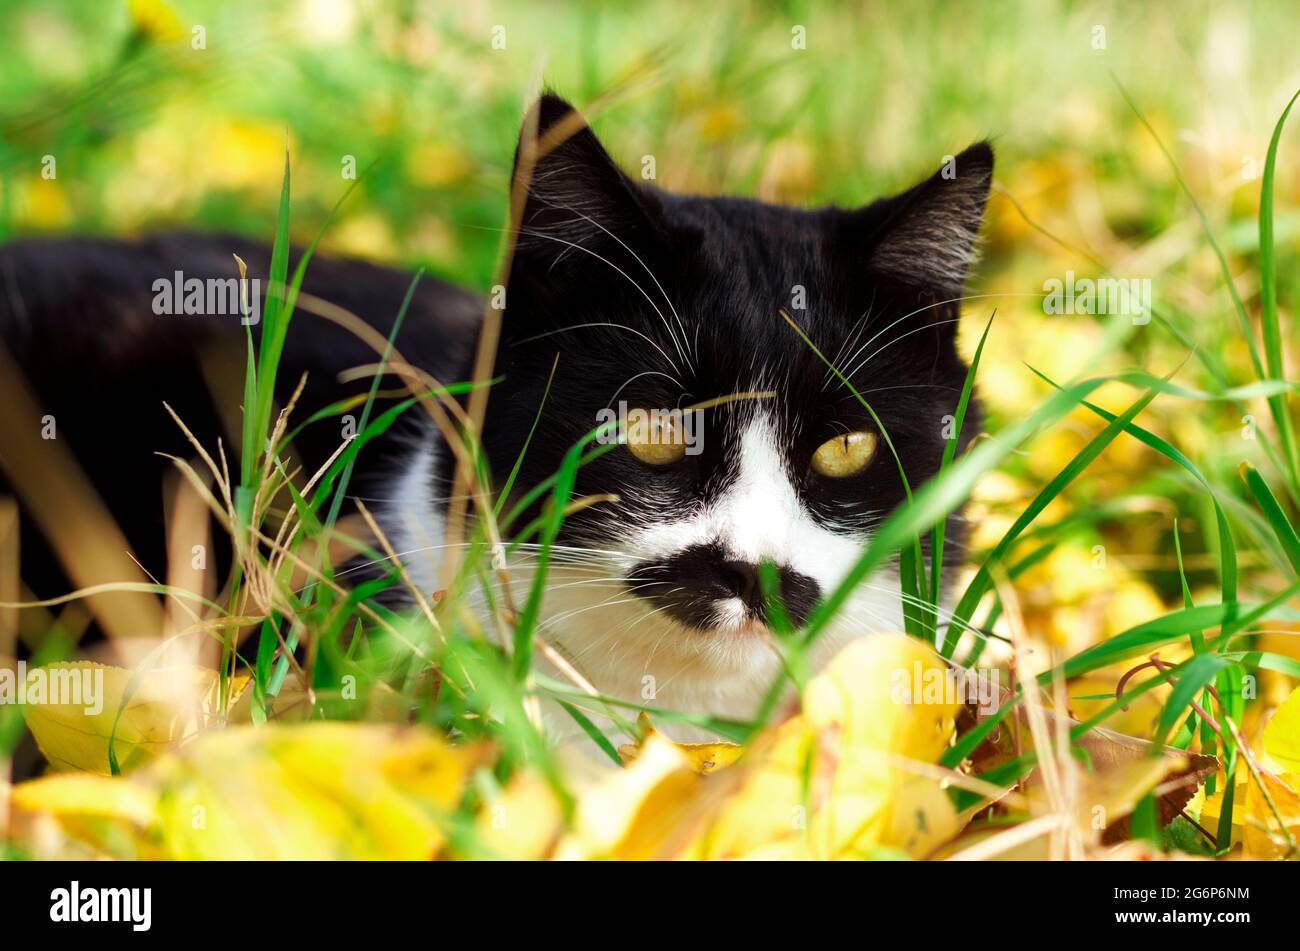 Front view of a cat lying in grass with autumn leaves Stock Photo